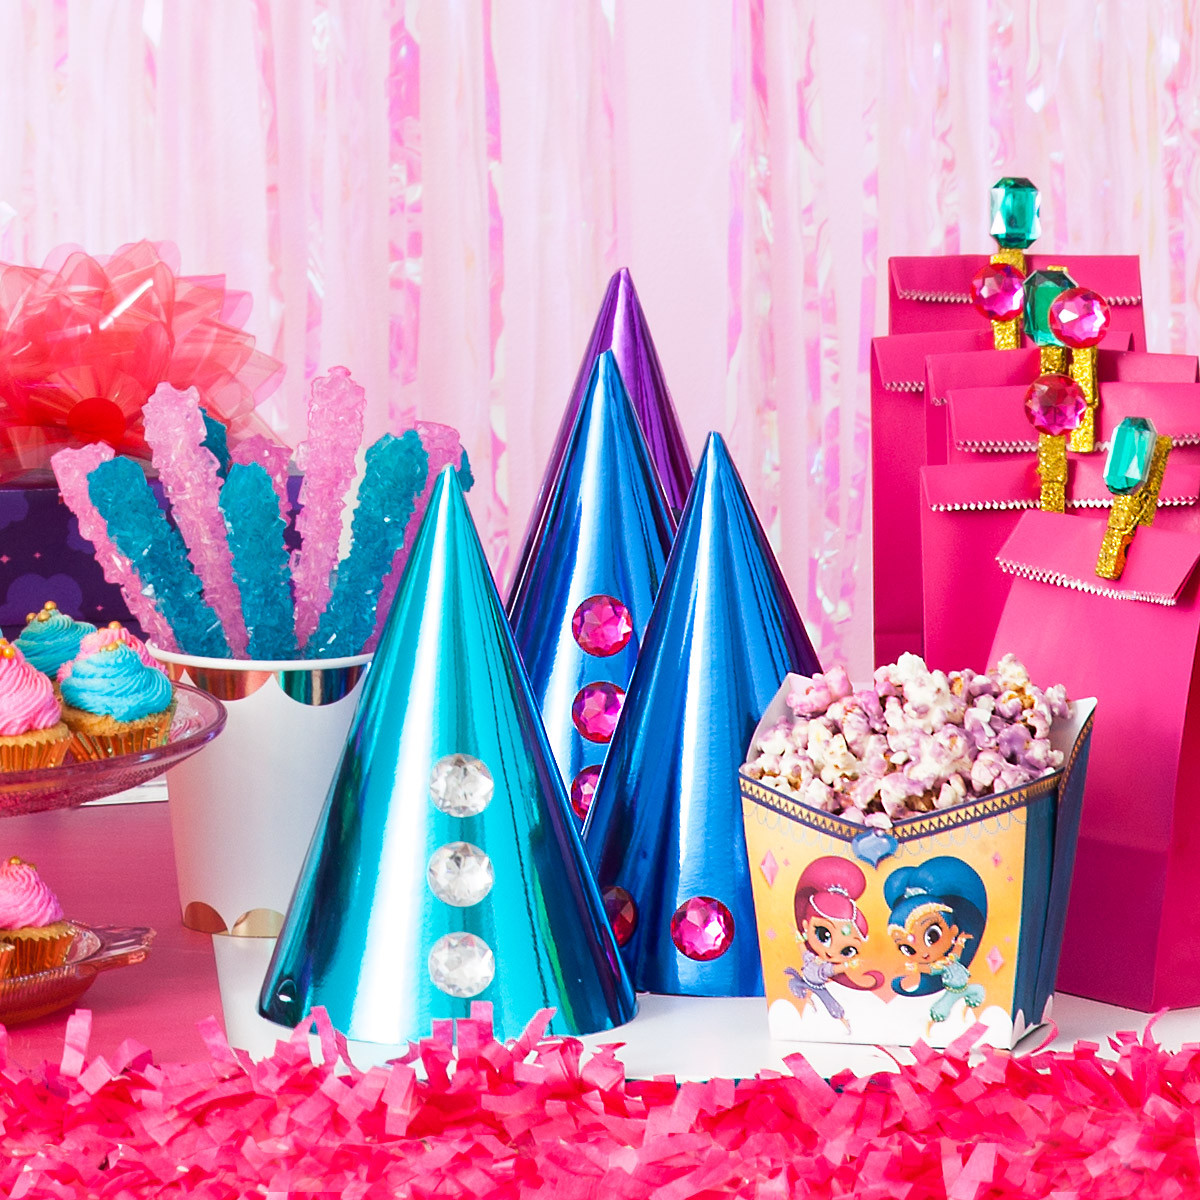 Shimmer And Shine Birthday Party Ideas
 Plan a Shimmer and Shine Birthday Party